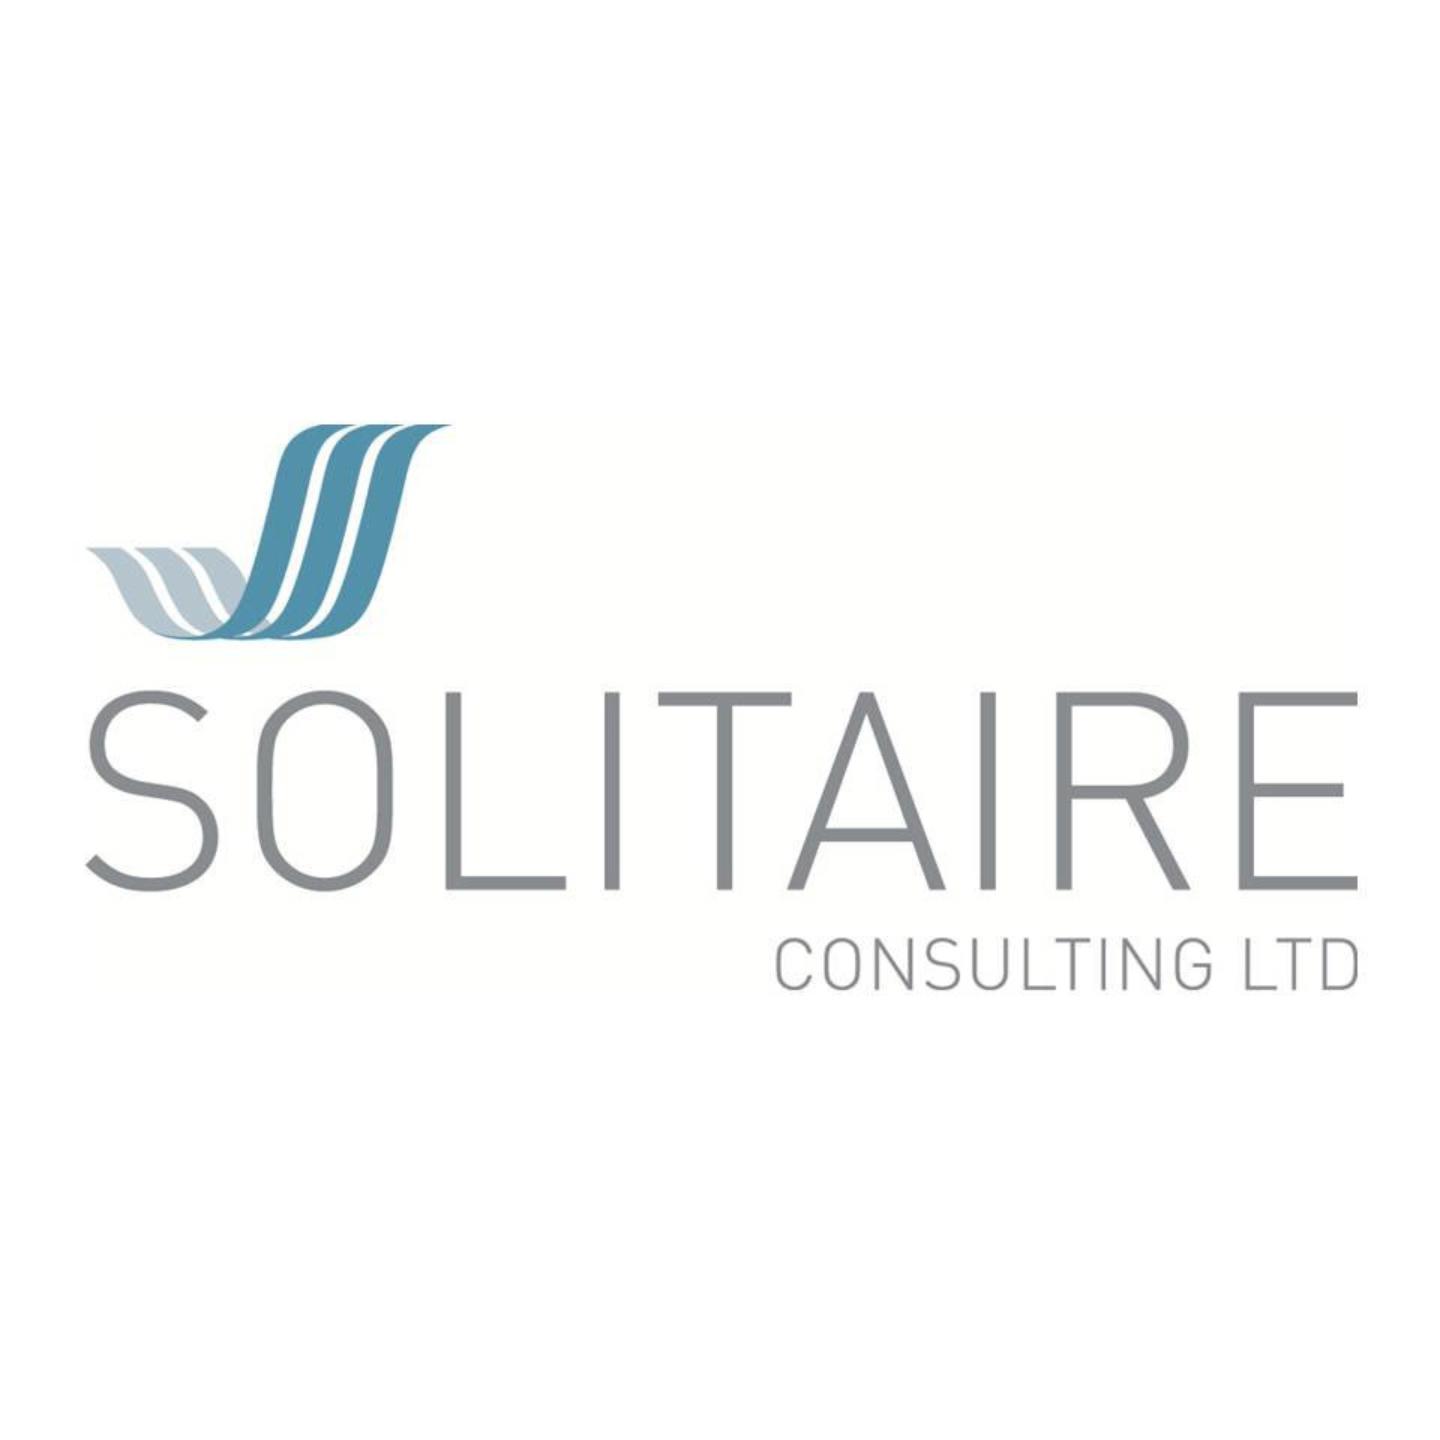 Solitaire Consulting